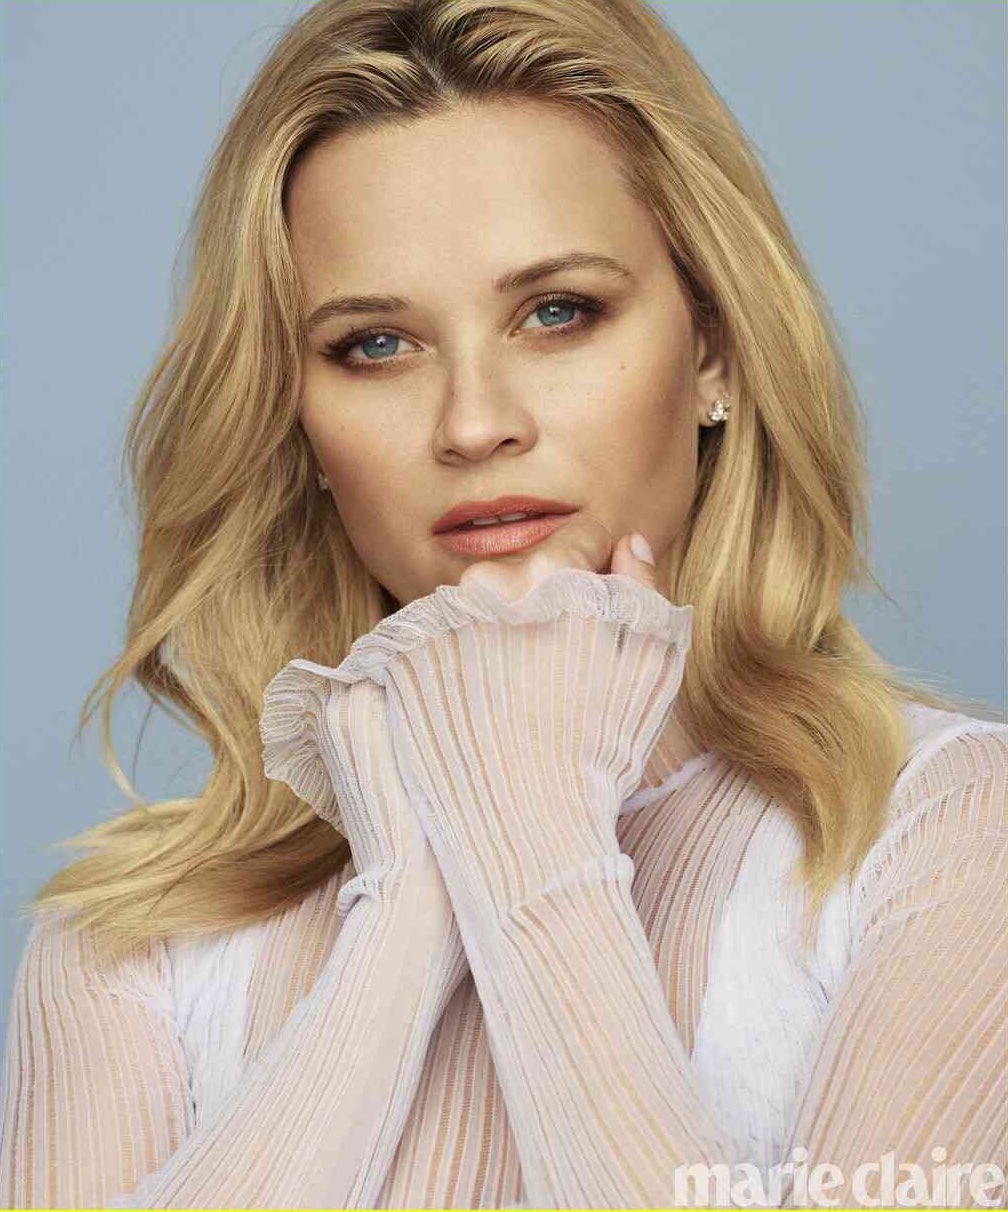 Happy birthday to one of the women I admire most, Reese Witherspoon!  